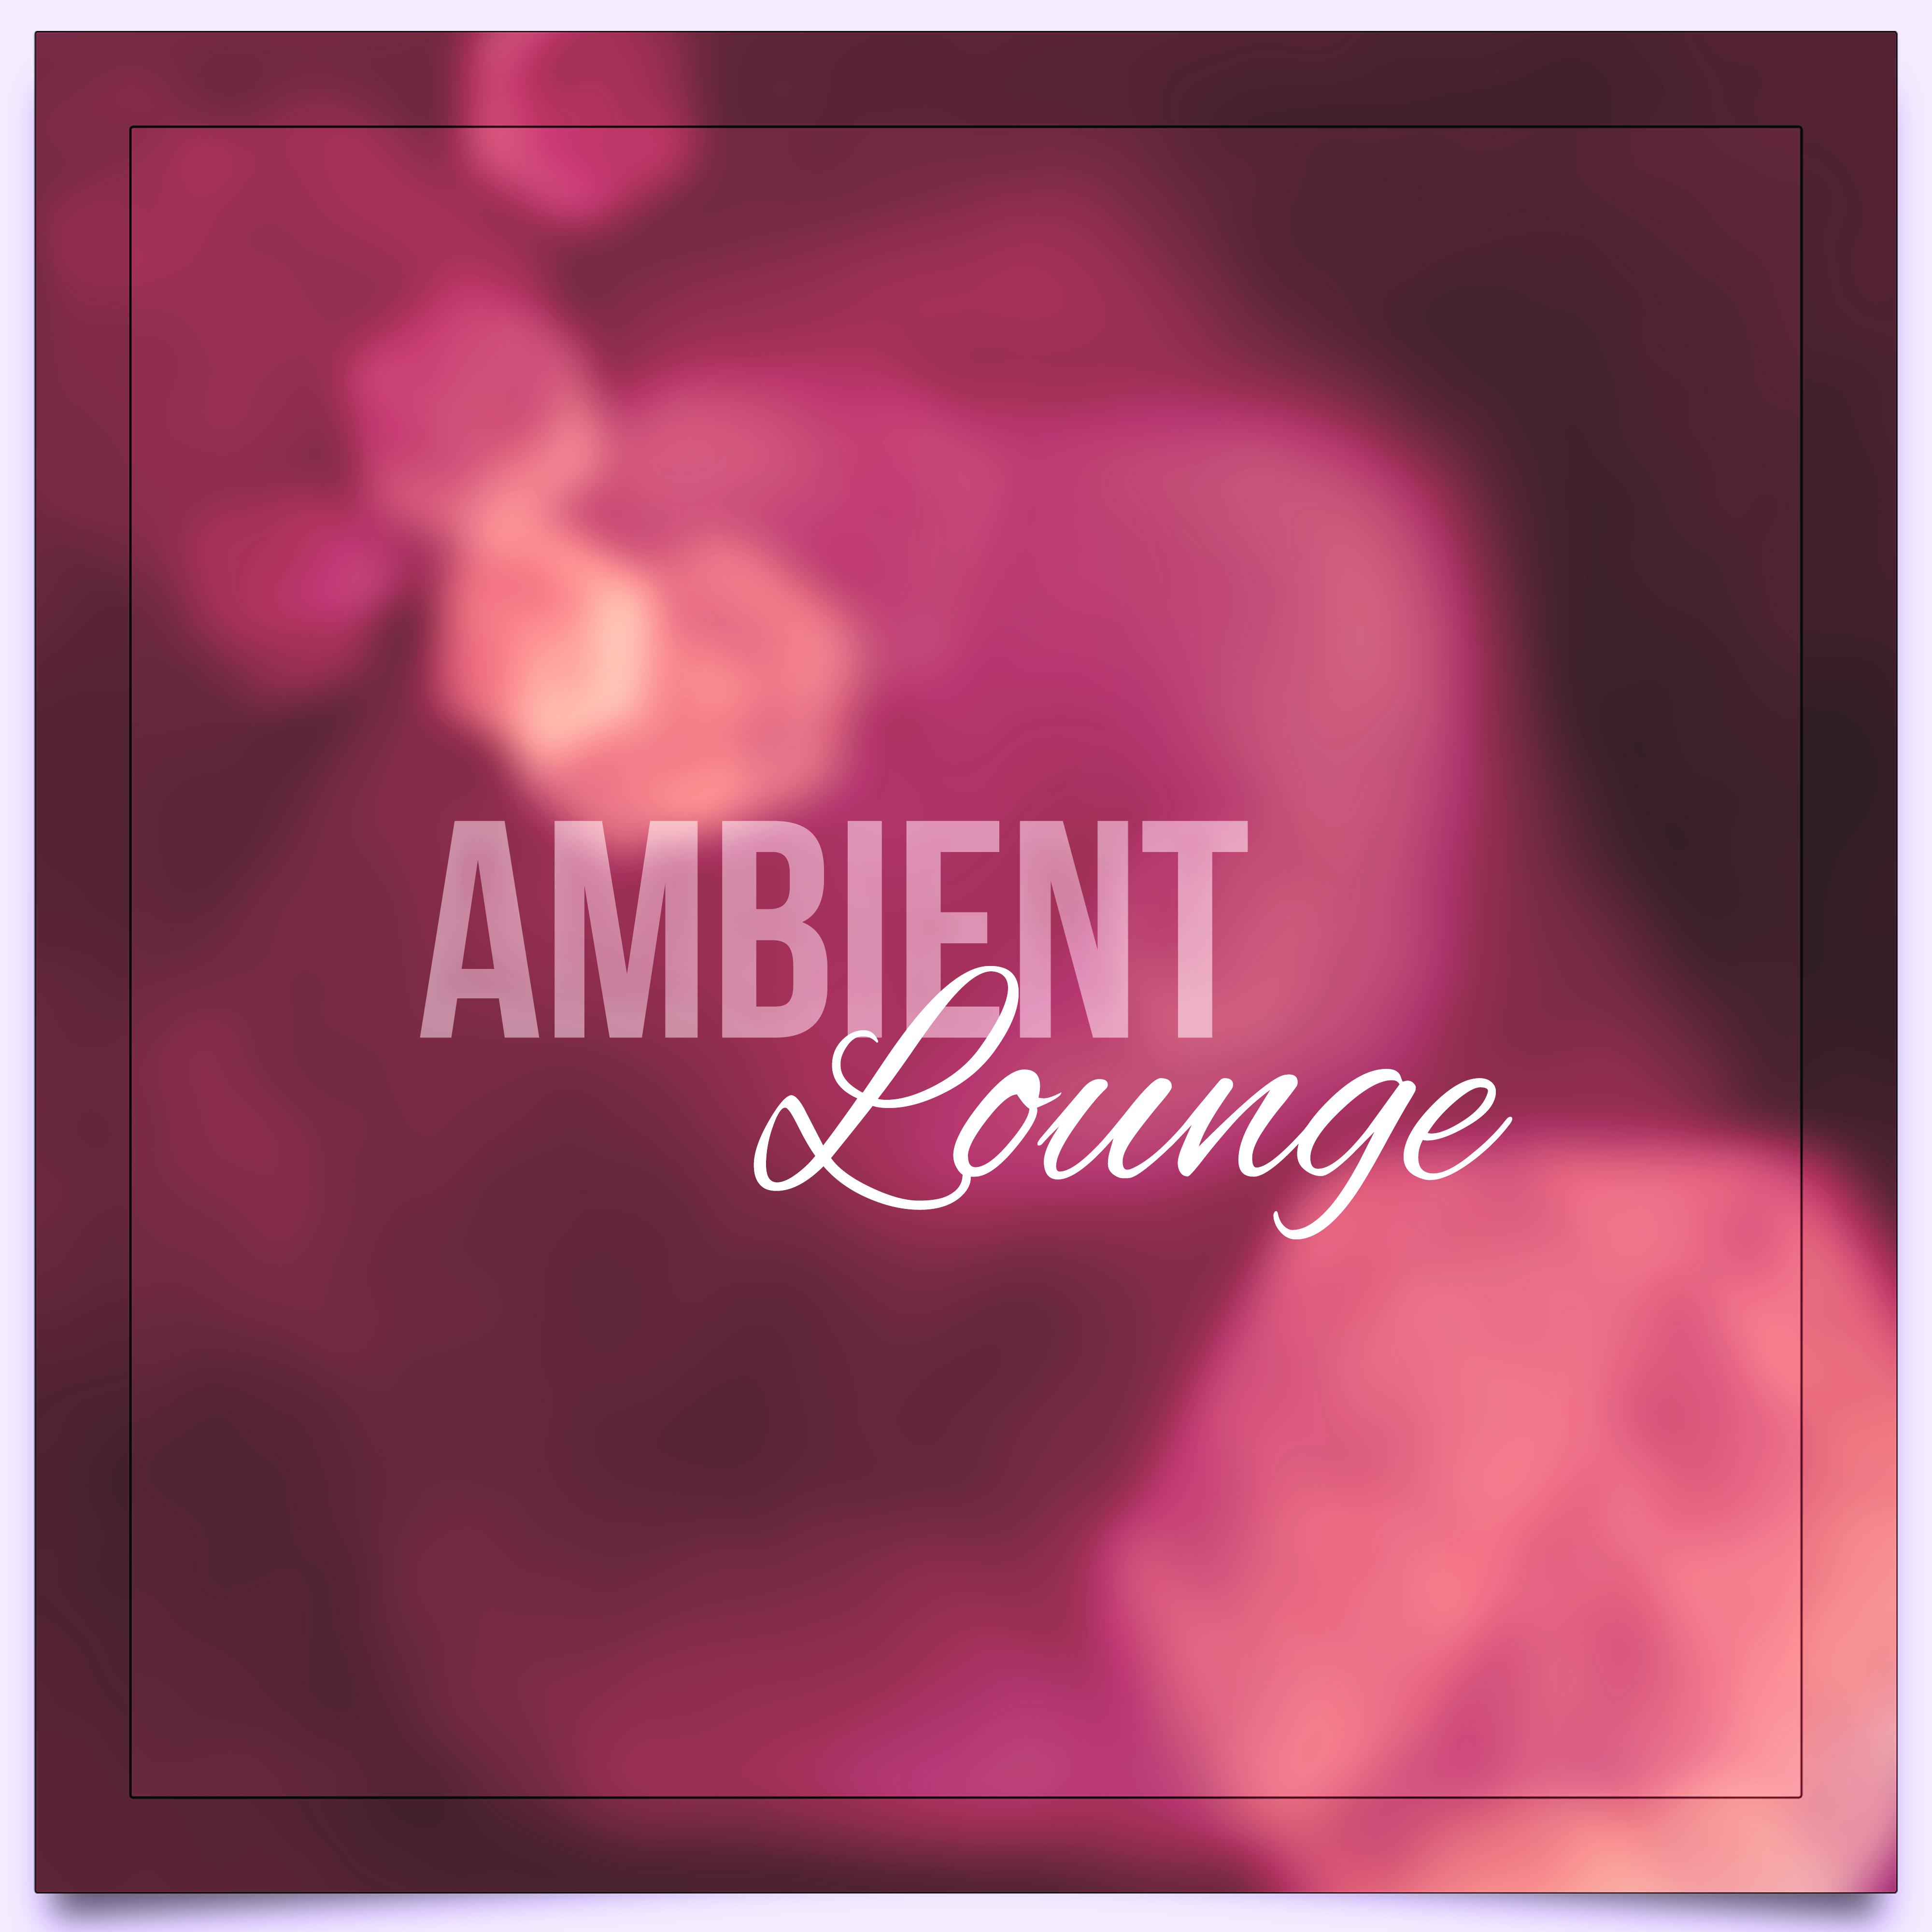 Ambient Lounge - Romantic Love Songs, Night Lovers, Deep Relaxation, Music Shades for Romantic Night, Special Moments for Intimate, Piano